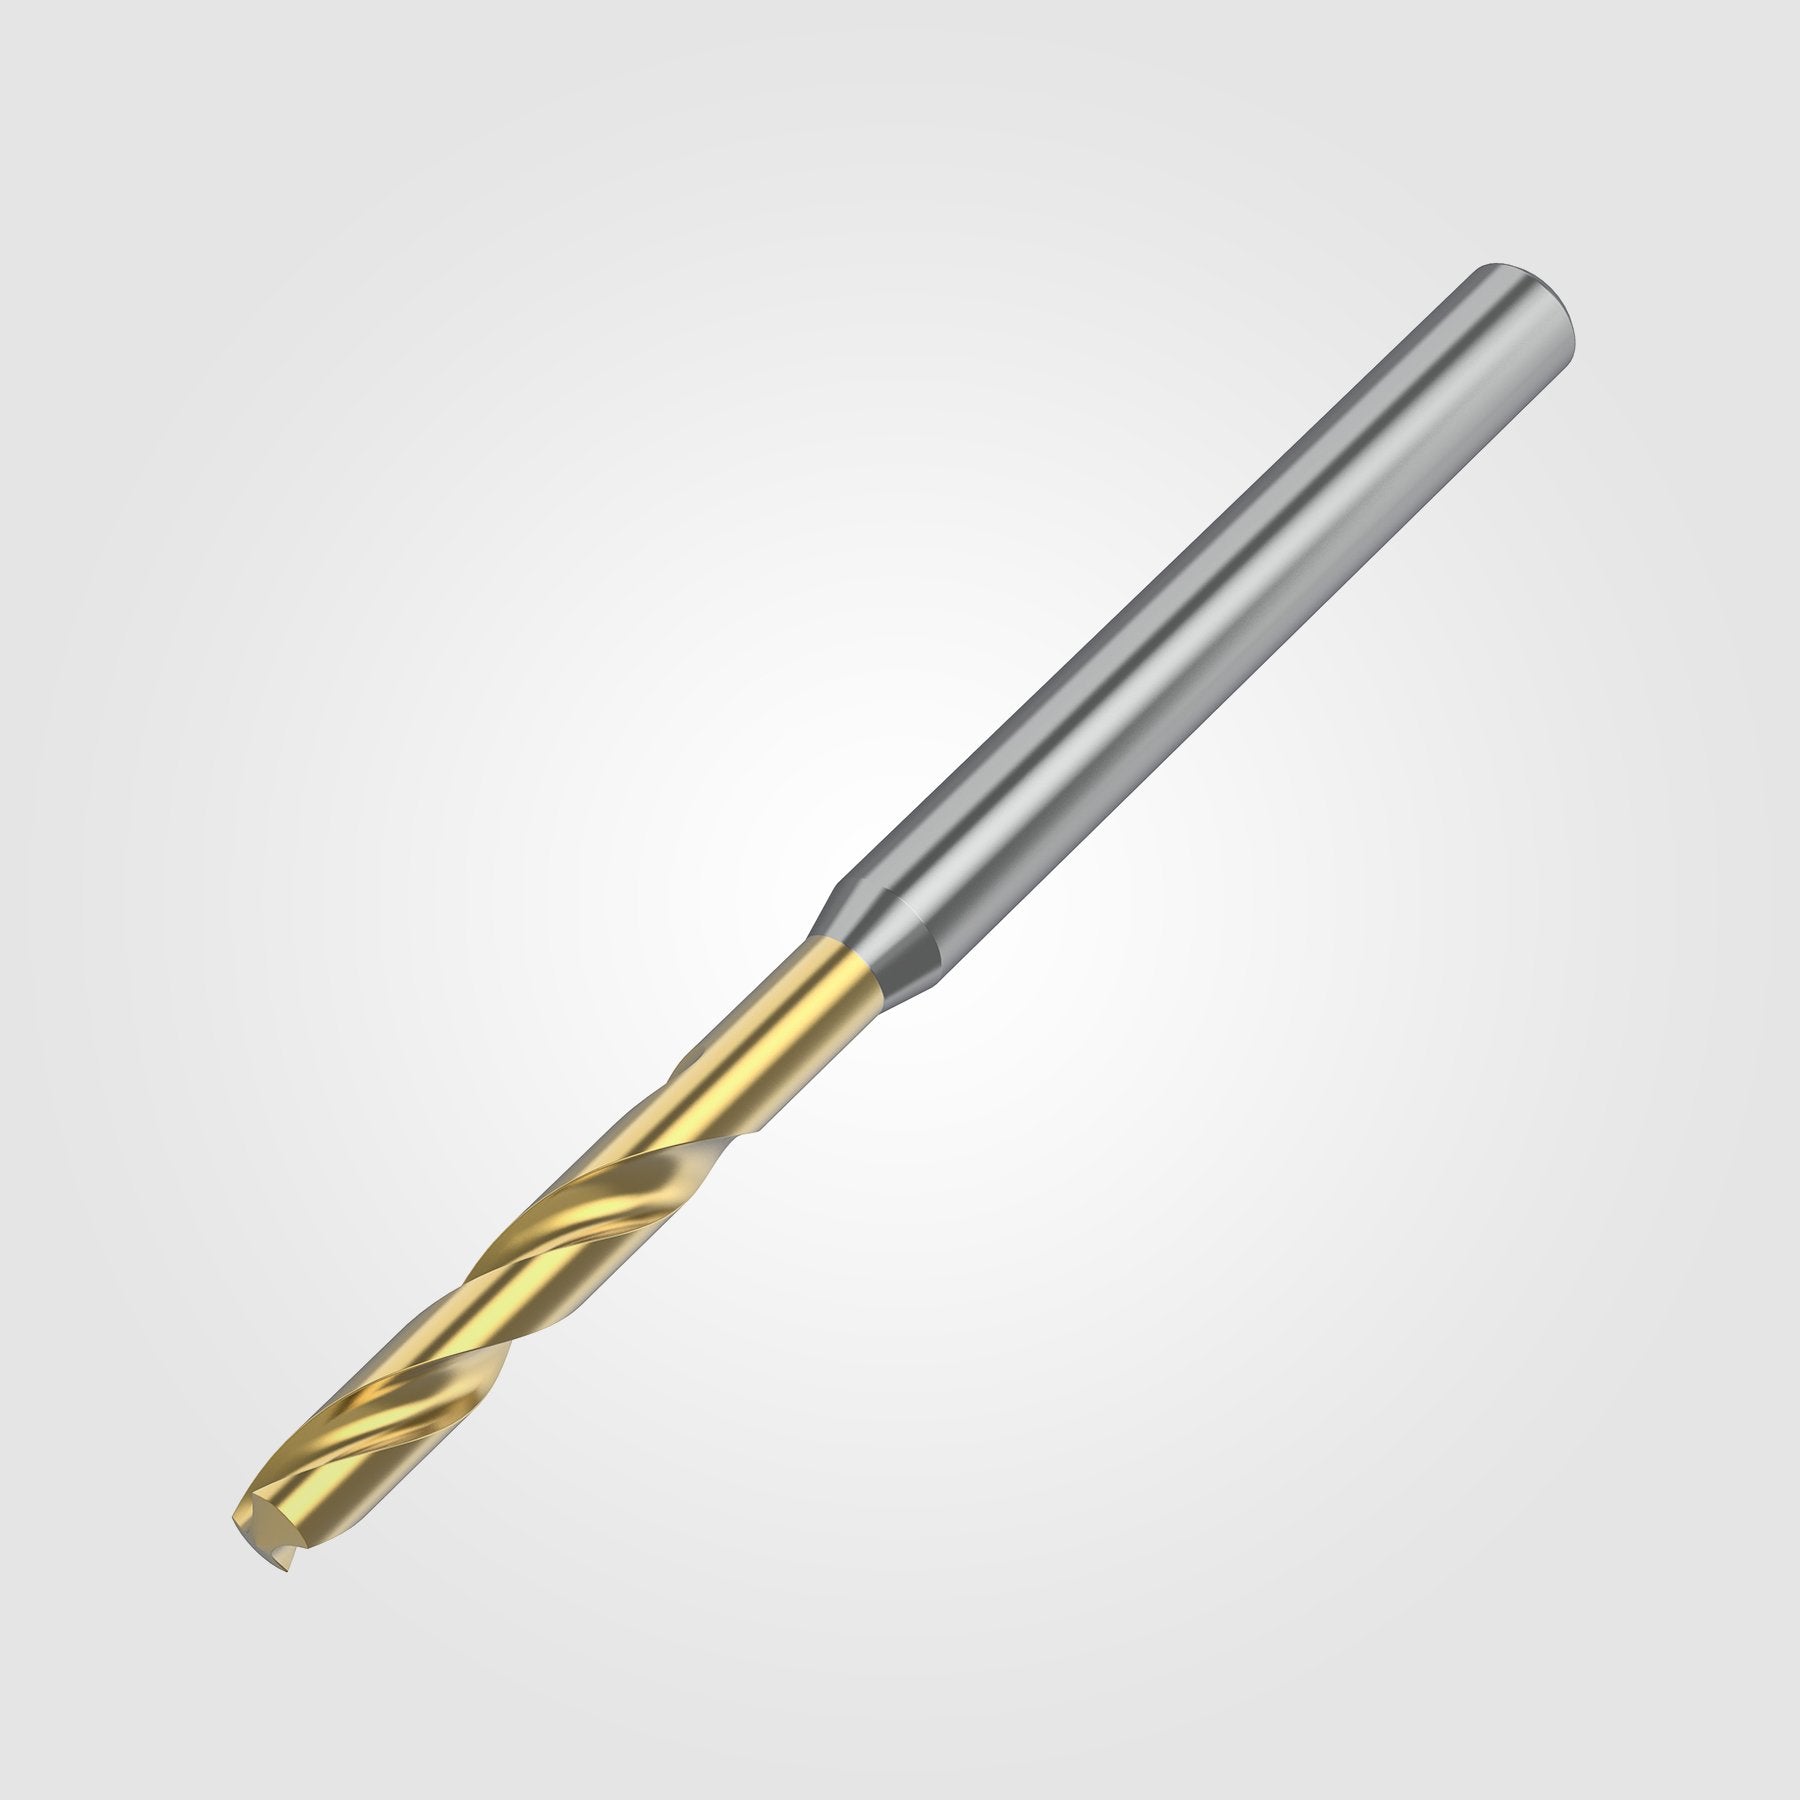 GOdrill (THROUGH COOLANT) | 1.6mm / .0630" / 3xD | SOLID CARBIDE DRILL | 4148805